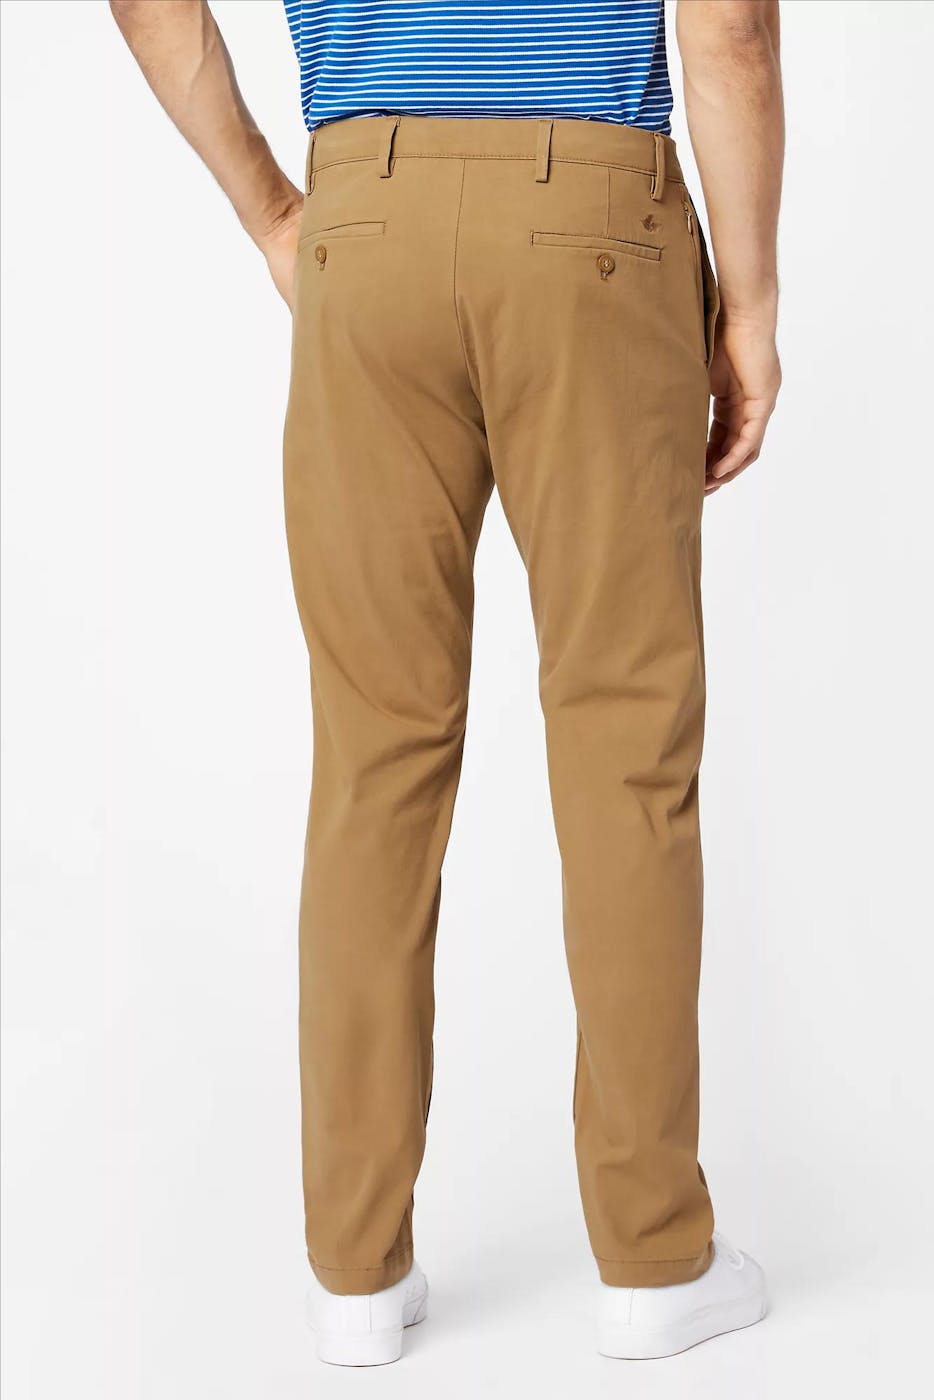 Dockers - Beige Tapered fit chino